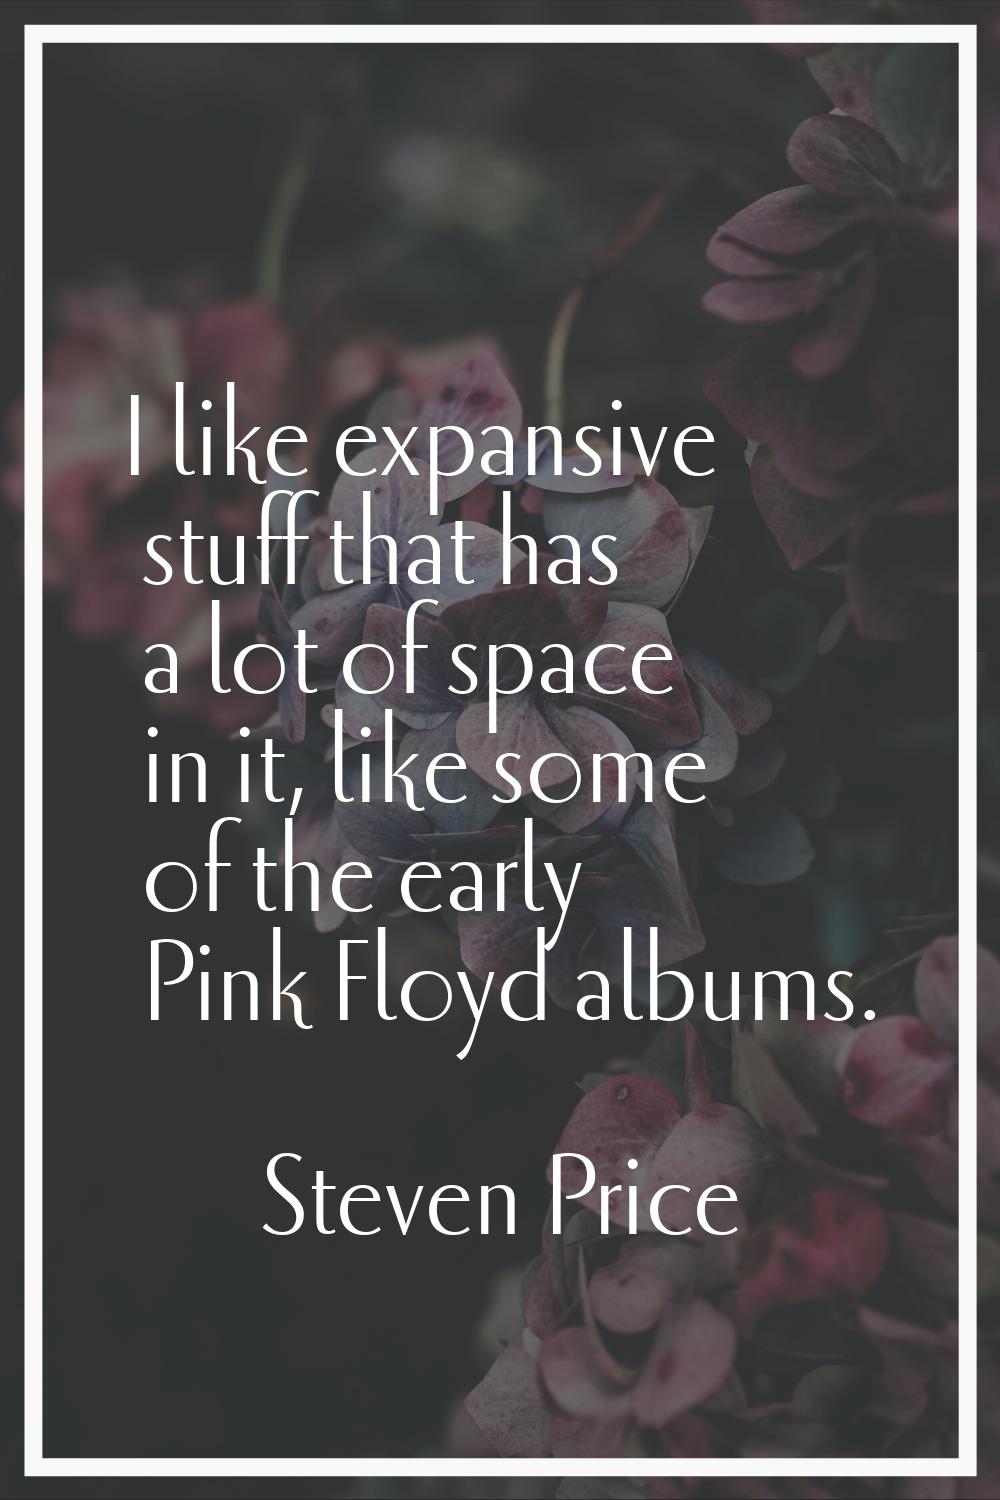 I like expansive stuff that has a lot of space in it, like some of the early Pink Floyd albums.